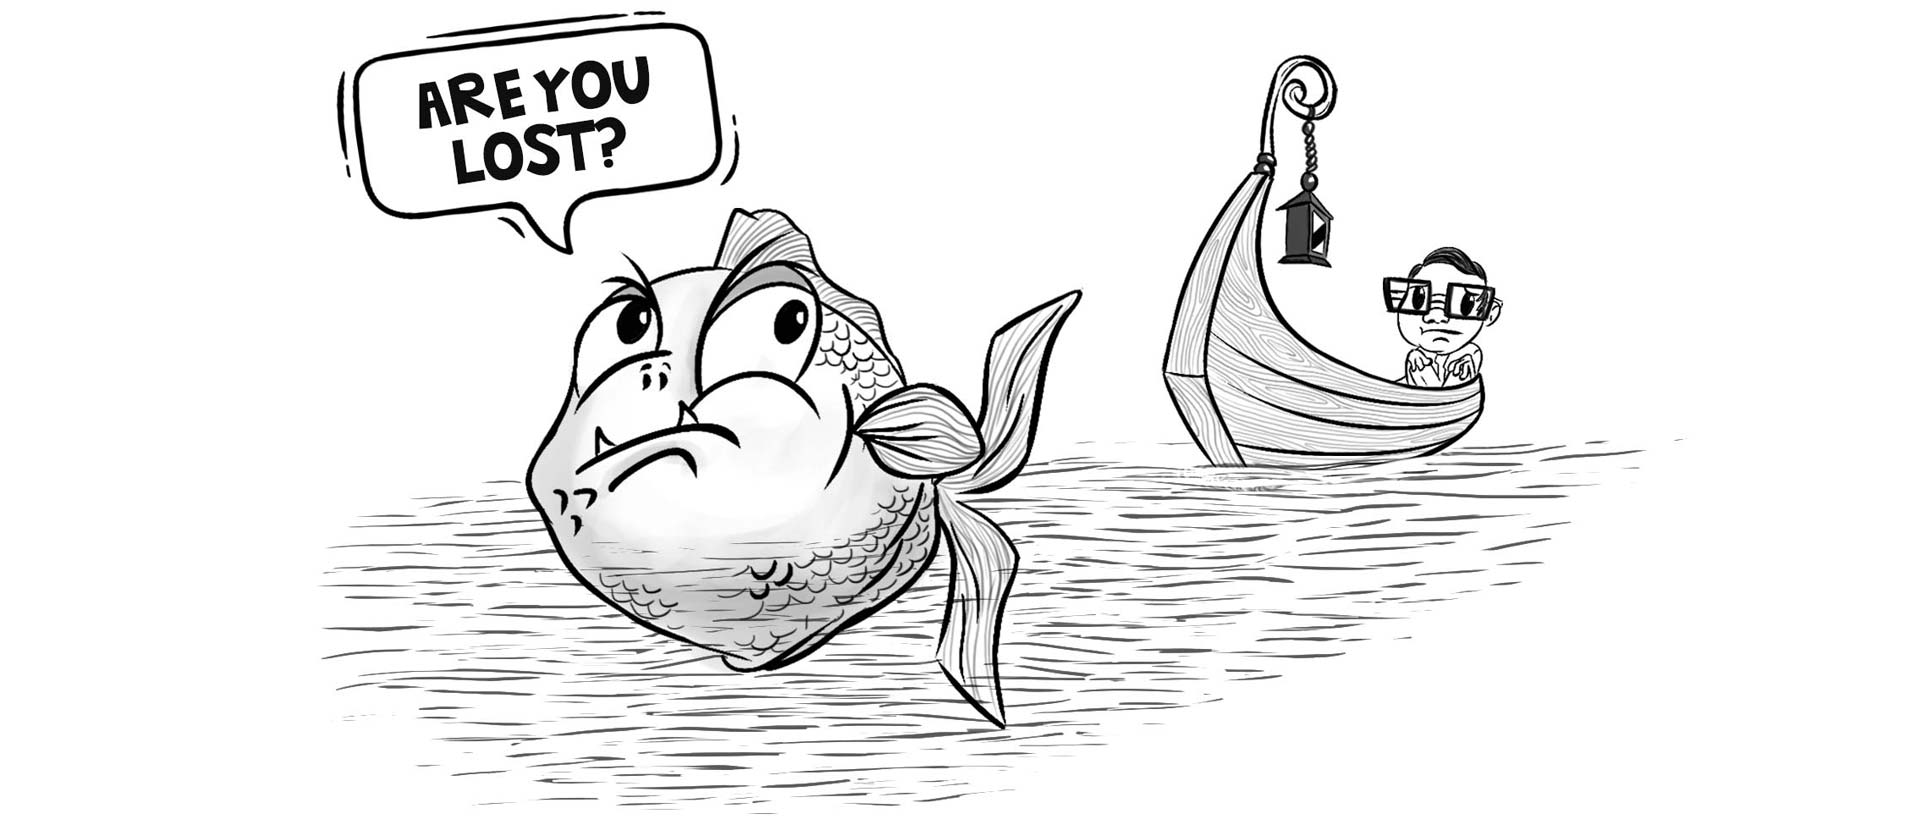 Error Page sketch of a lost boat man and a fish asking Are you Lost?